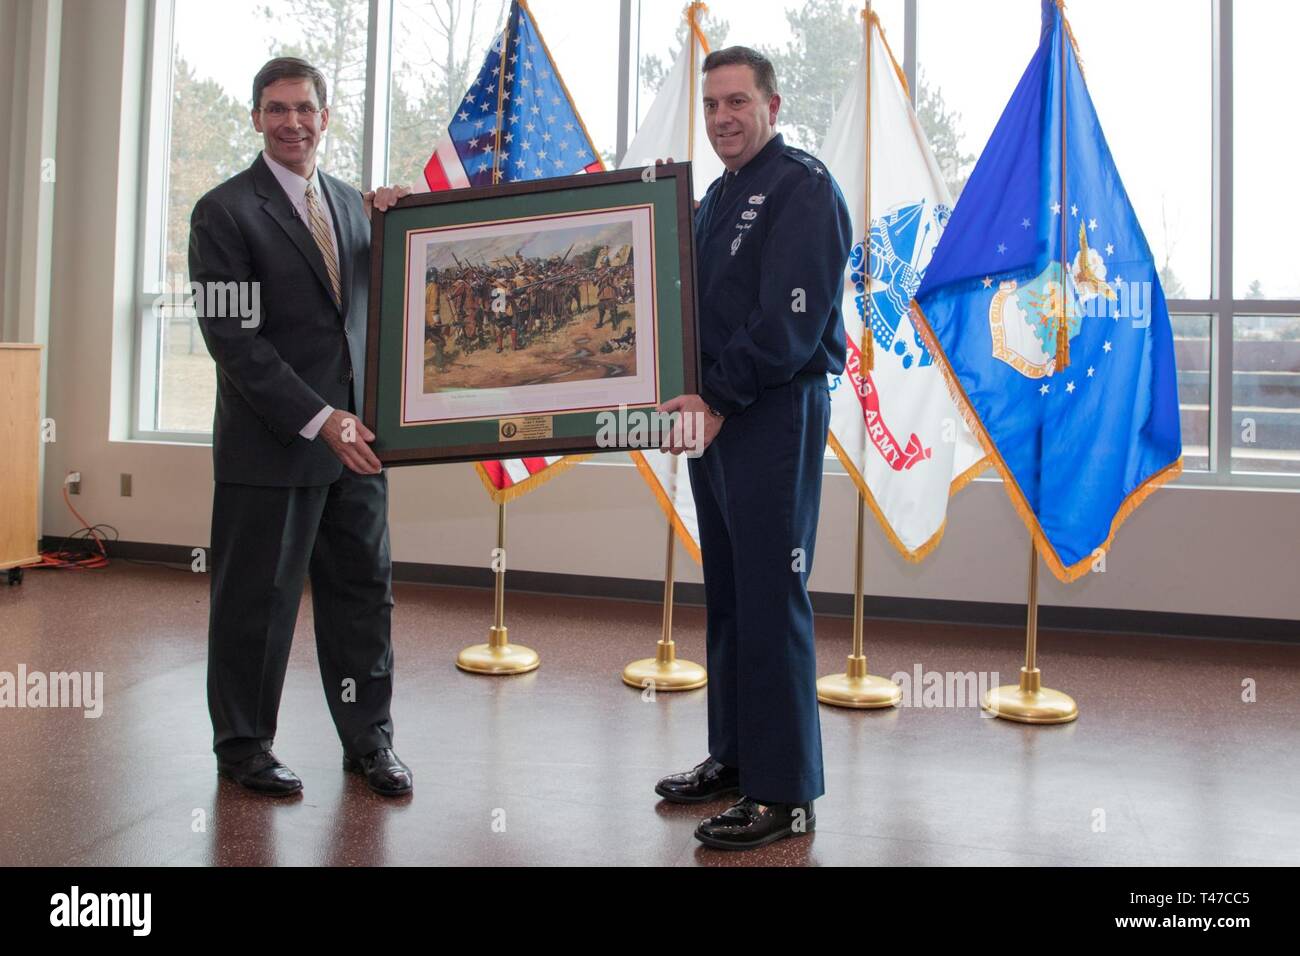 HANSCOM AIR FORCE BASE, Mass. – Dr. Mark T. Esper, Secretary of the Army, joins Maj. Gen. Gary W. Keefe, the Adjutant General of the Massachusetts National Guard and other senior leadership during a visit to Joint Force Headquarters of the Massachusetts National Guard, here, March 15, 2019. After an awards ceremony held to recognize soldiers and civilians of the Massachusetts Army National Guard, Esper held a town hall to communicate and connect with the soldiers and airmen of the Commonwealth. Stock Photo